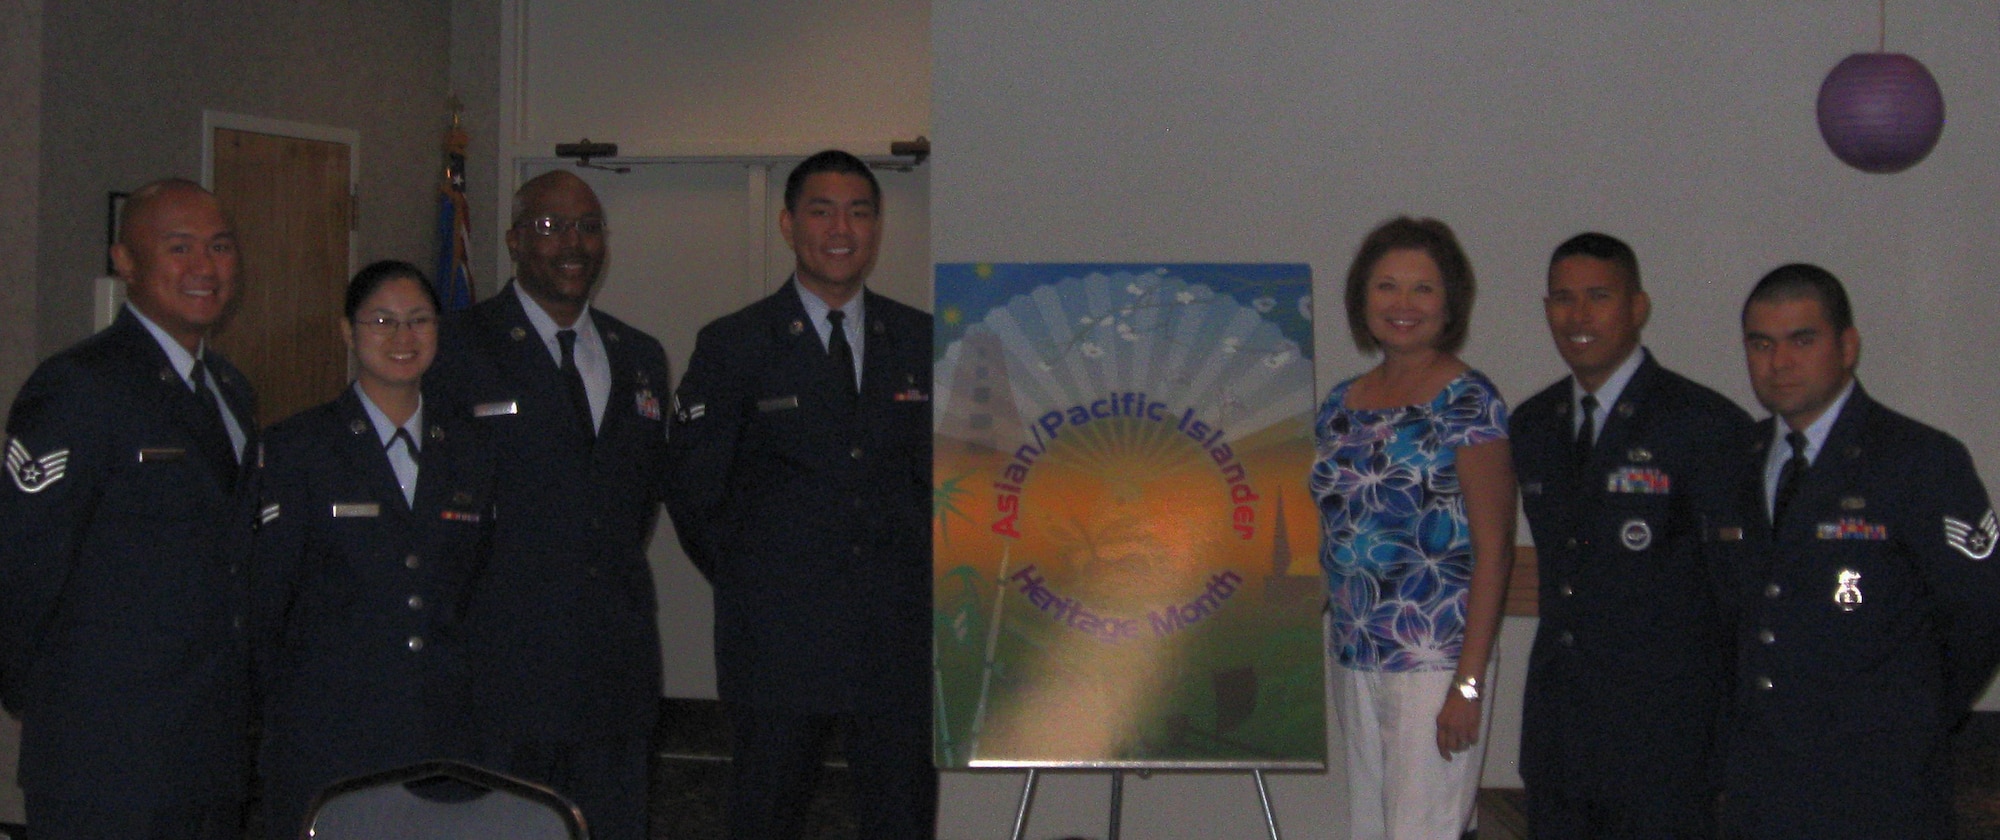 Members of the Asian Pacific American Heritage Luncheon planning committee. Pictured from left to right: SSgt Andrew Maramag, 366 TRS, A1C Pauline Cardenas, 82 CPTS, MSgt Marcus Starks, 372 TRS, A1C Gino Pogoy, 82 MDOS, Ms. Debbie Baldwin, 982 TRG, TSgt Ruben Labrador, 361 TRS, SSgt Jose Deharo, 82 SFS. (U.S. Air Force Photo/Kimberly Dagdag)